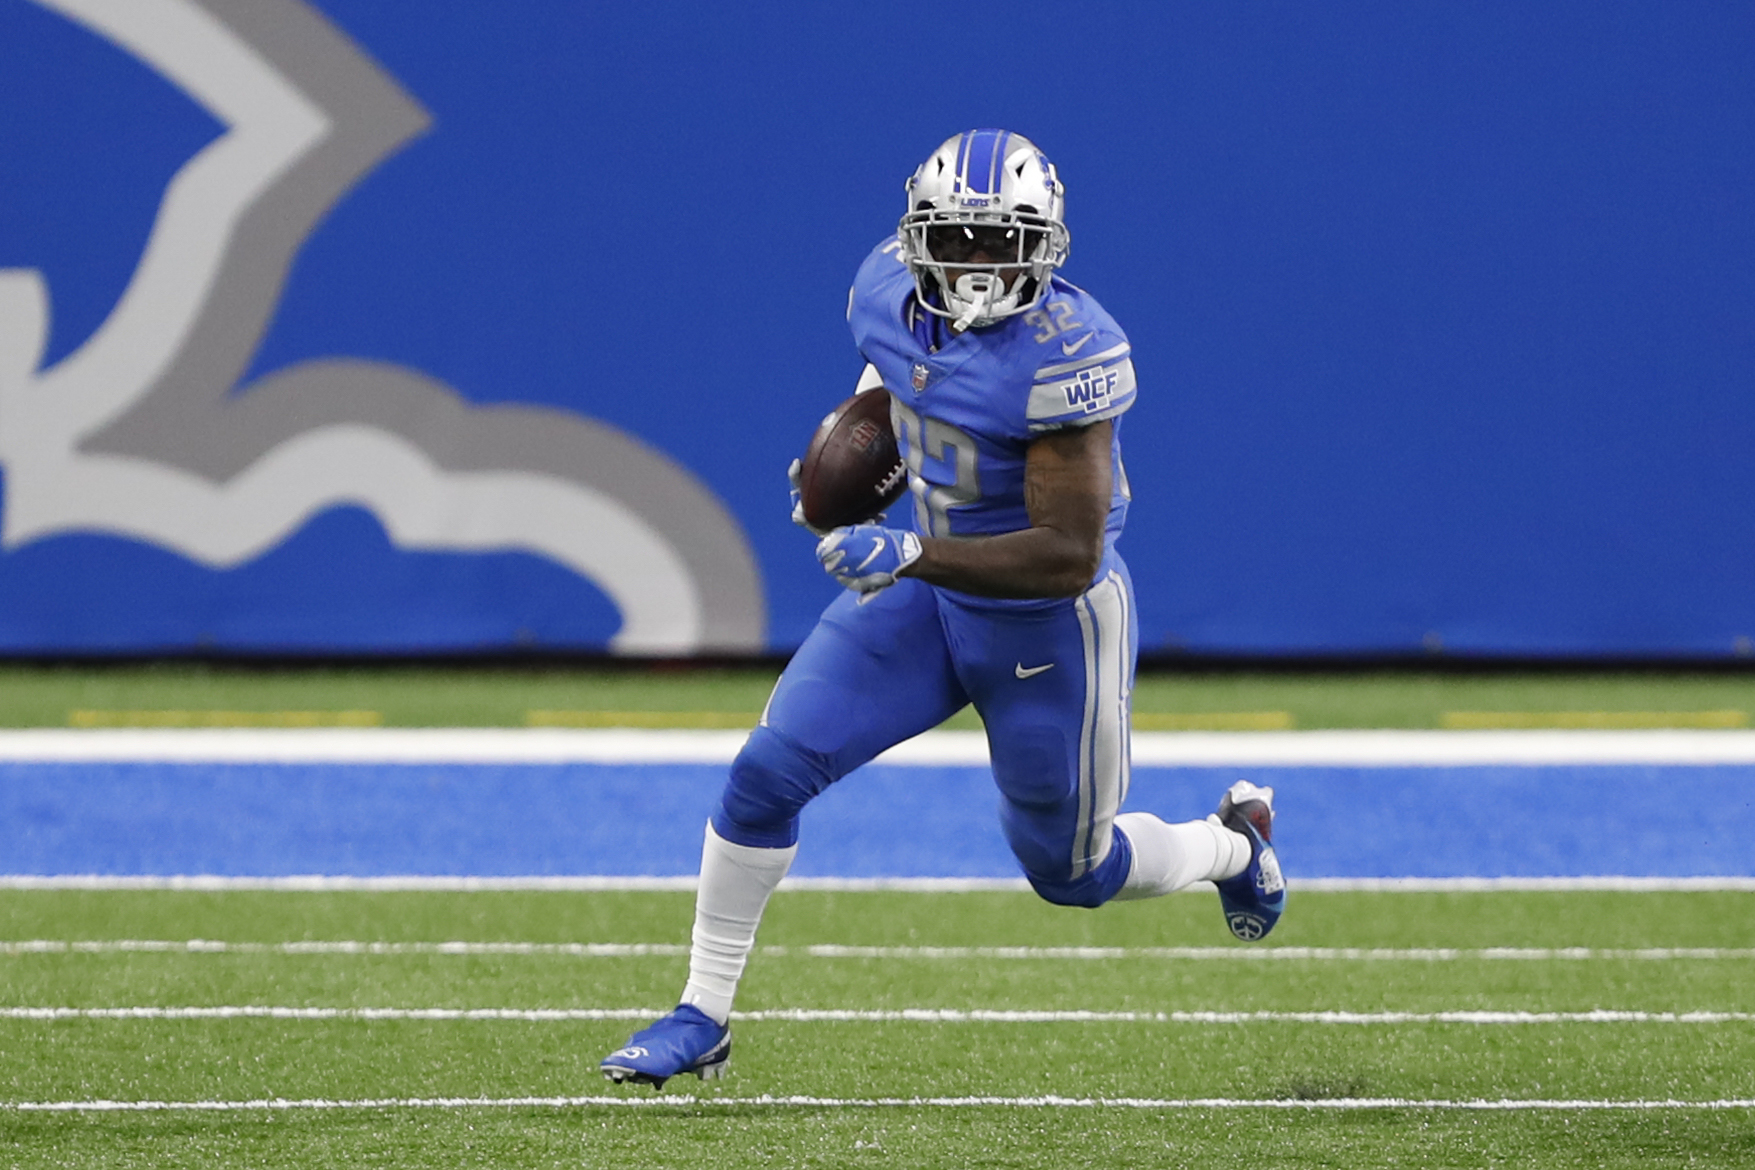 &nbsp;Detroit Lions running back D’Andre Swift (32) runs the ball during the second quarter against the Green Bay Packers at Ford Field.